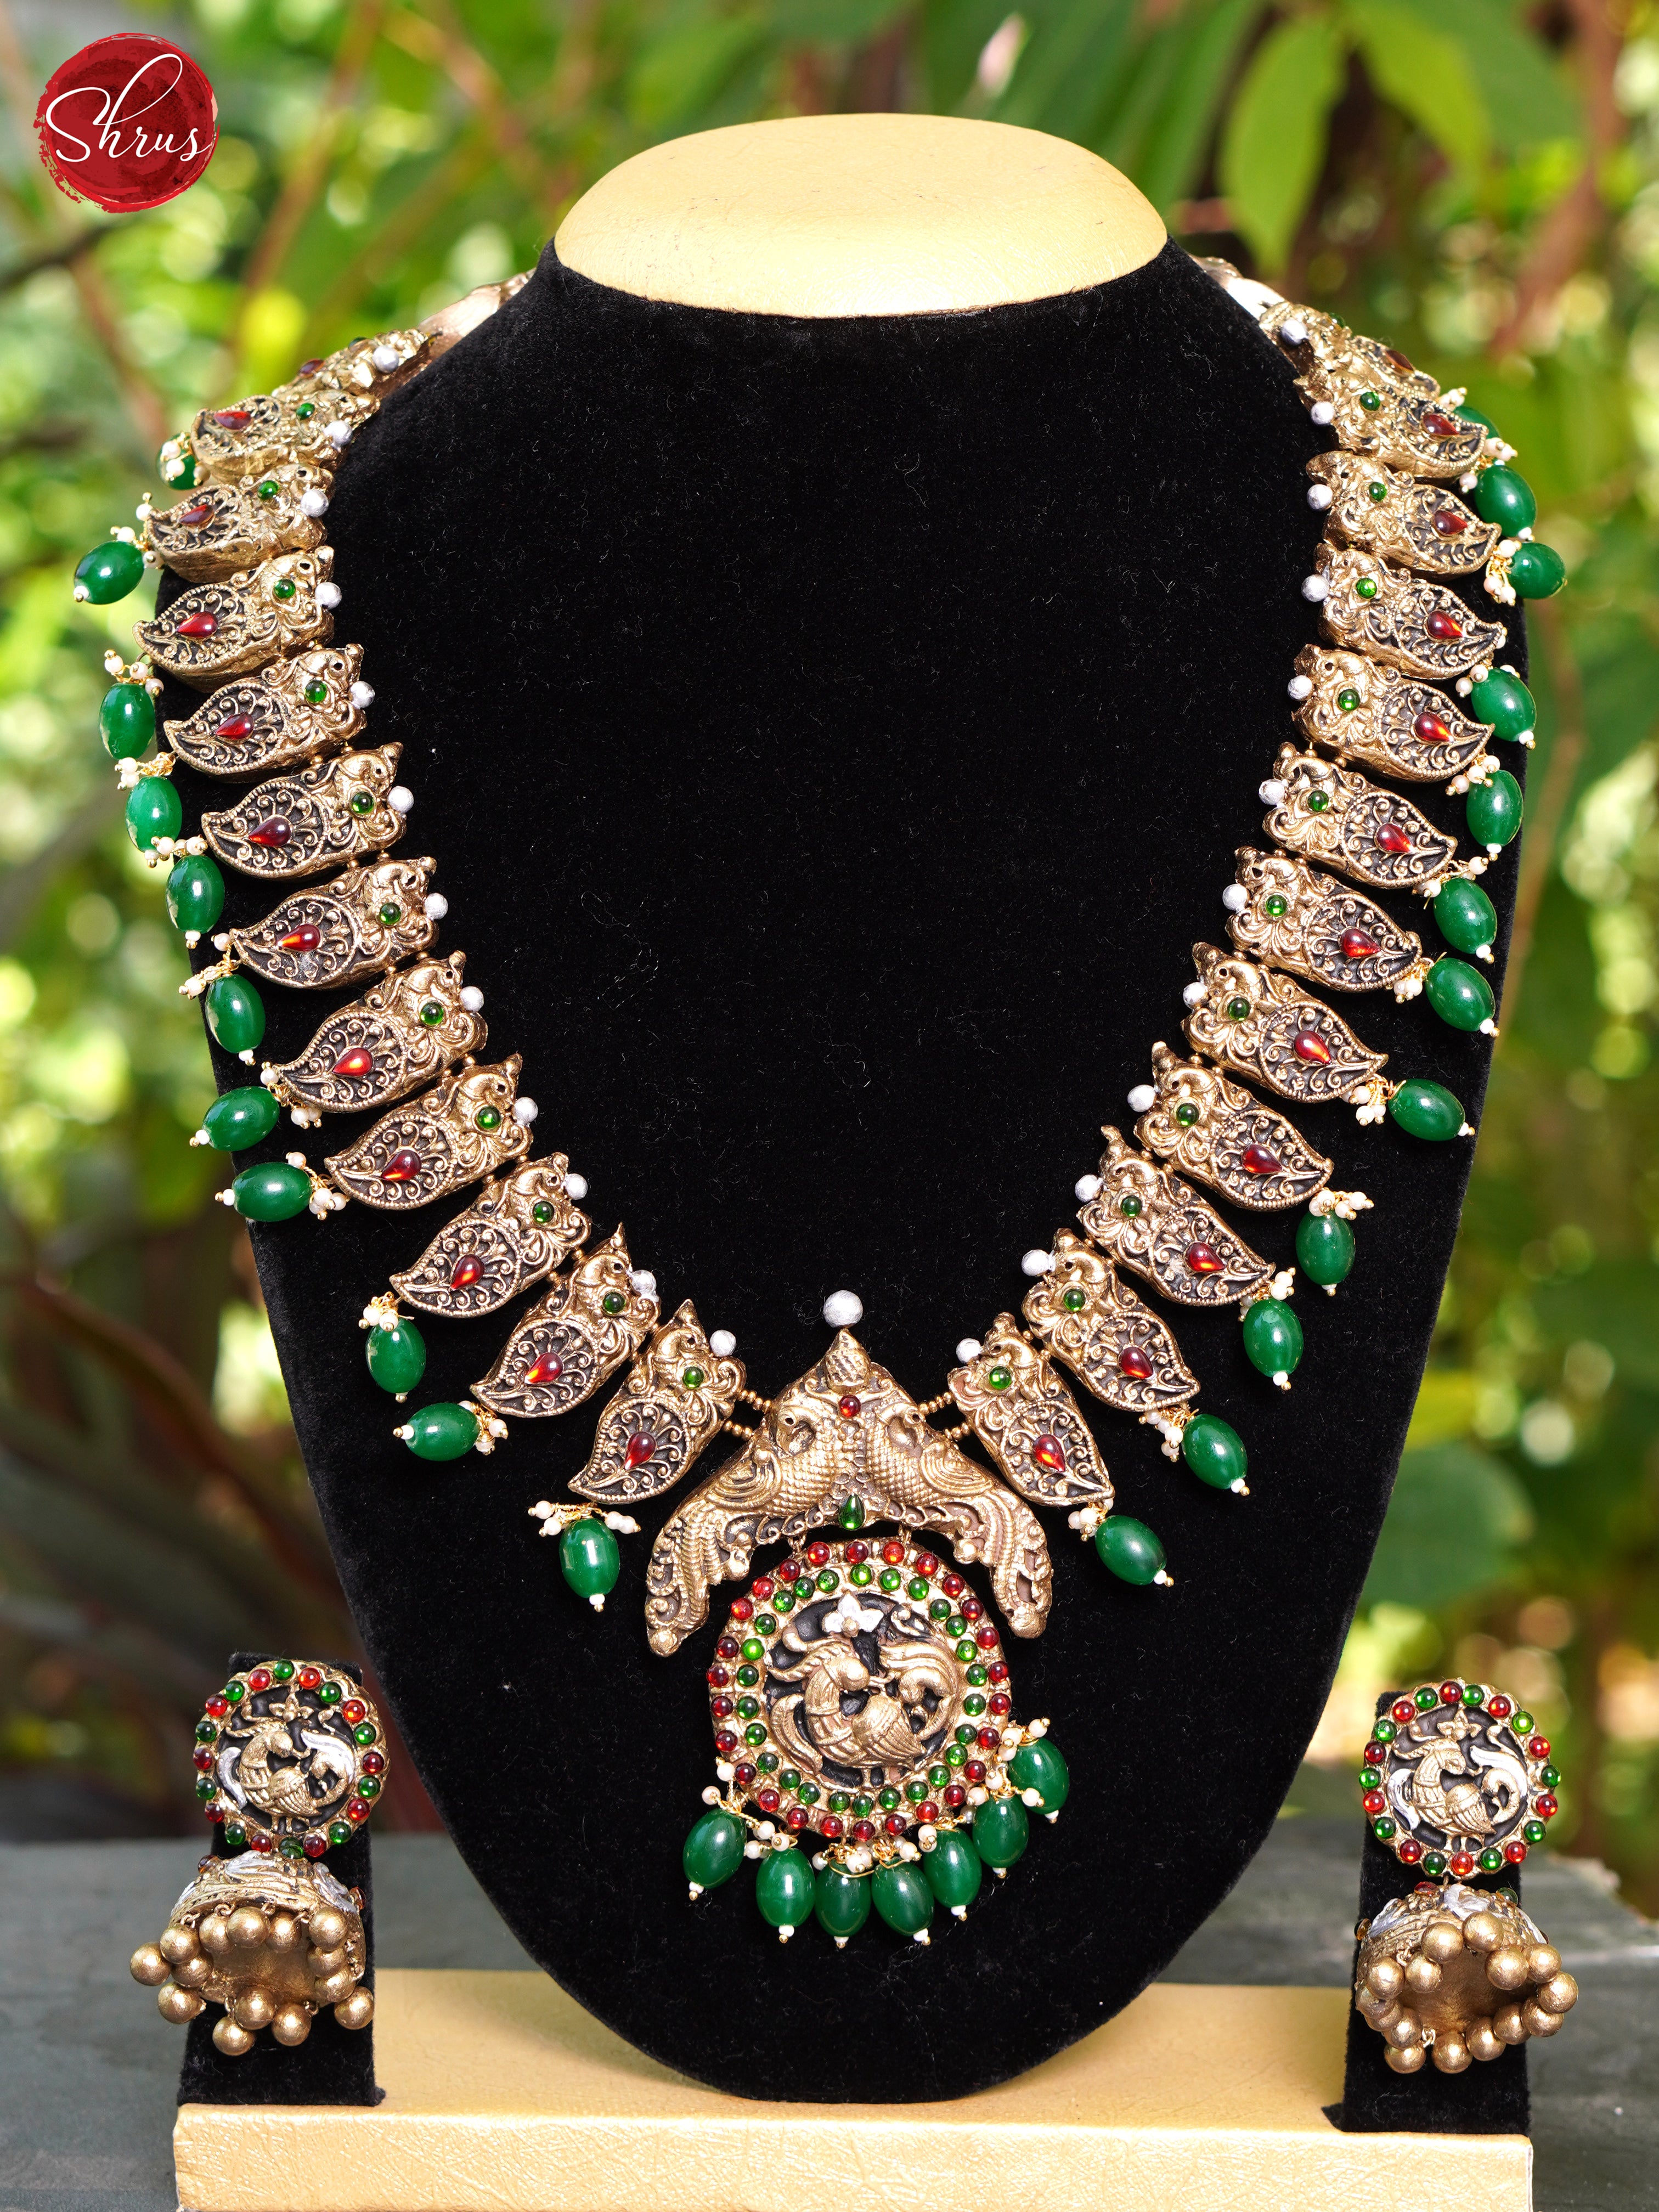 Handmade Peacock Terracotta necklace with Jhumkas - Accessories - Shop on ShrusEternity.com